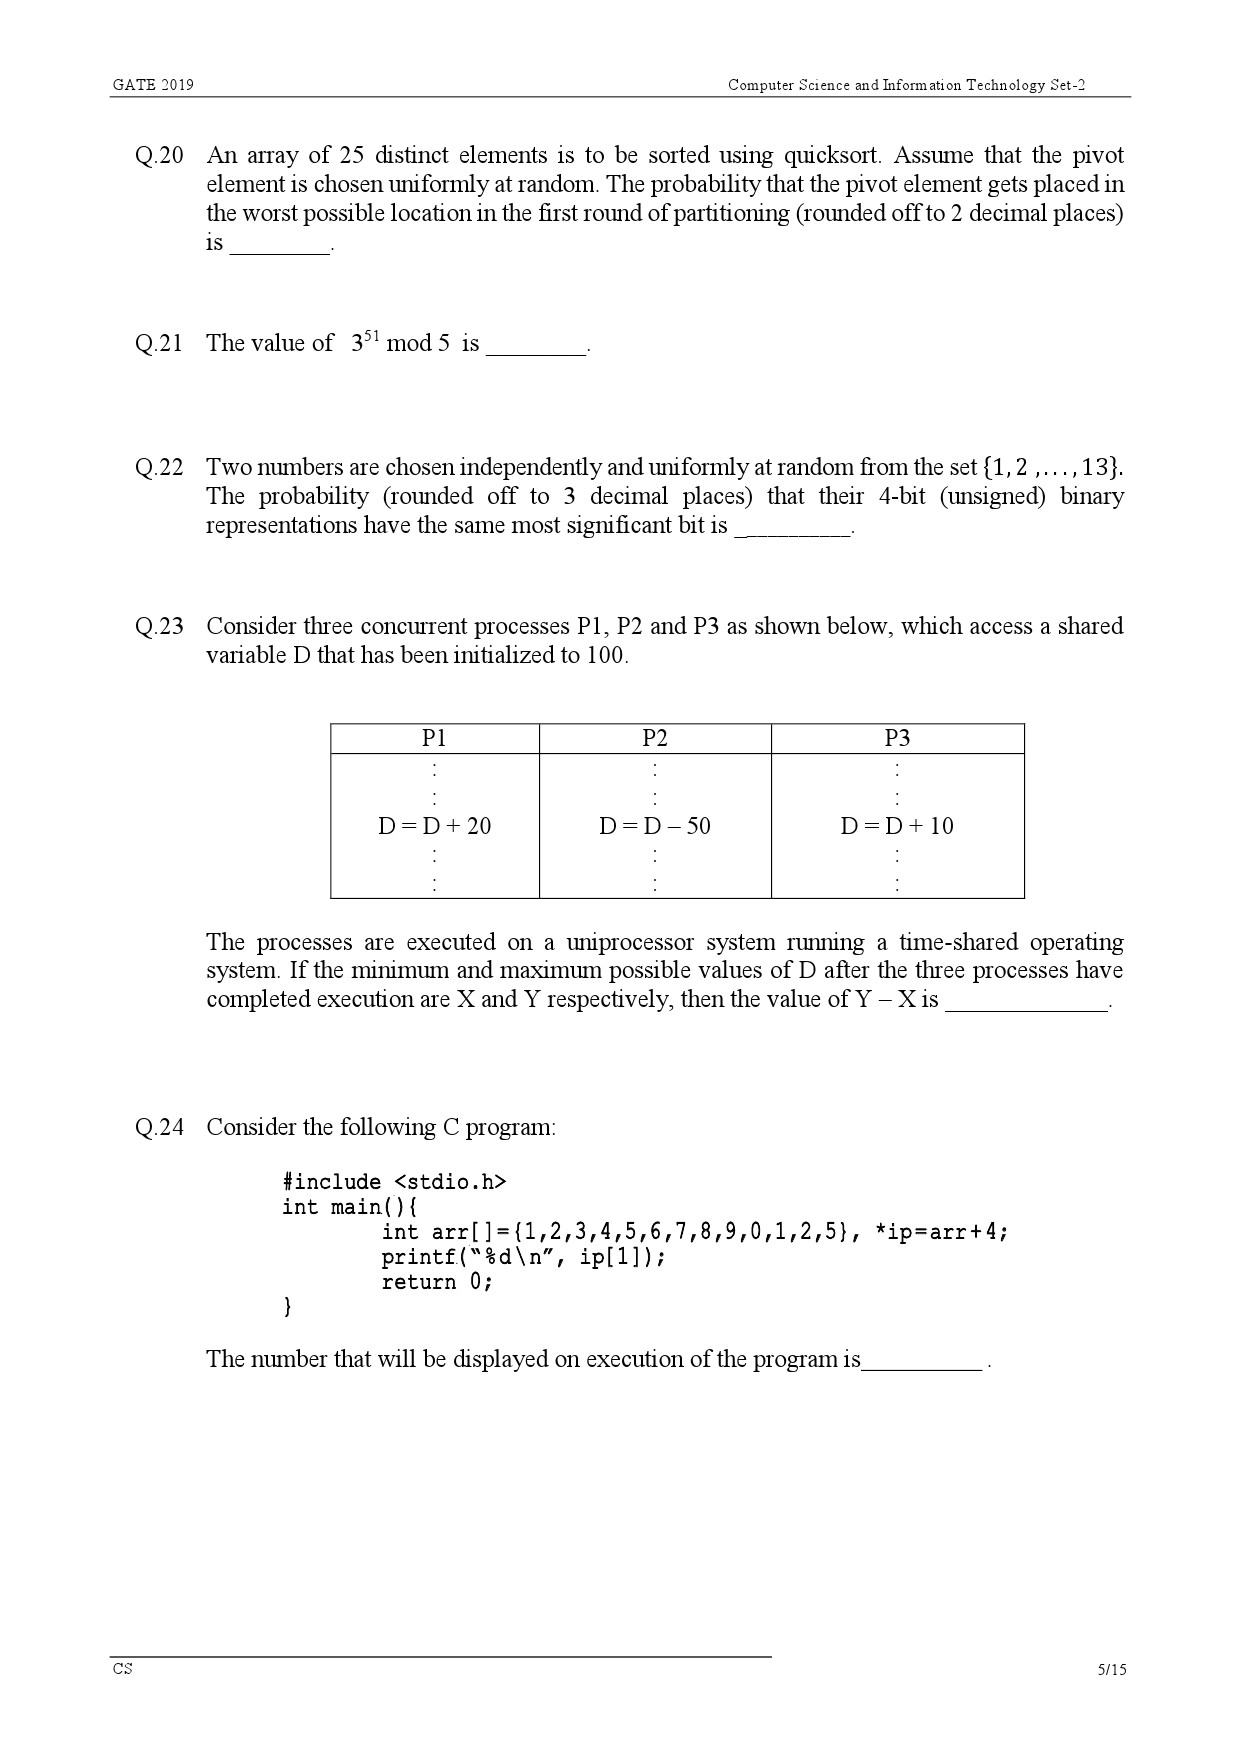 GATE Exam Question Paper 2019 Computer Science and Information Technology 8